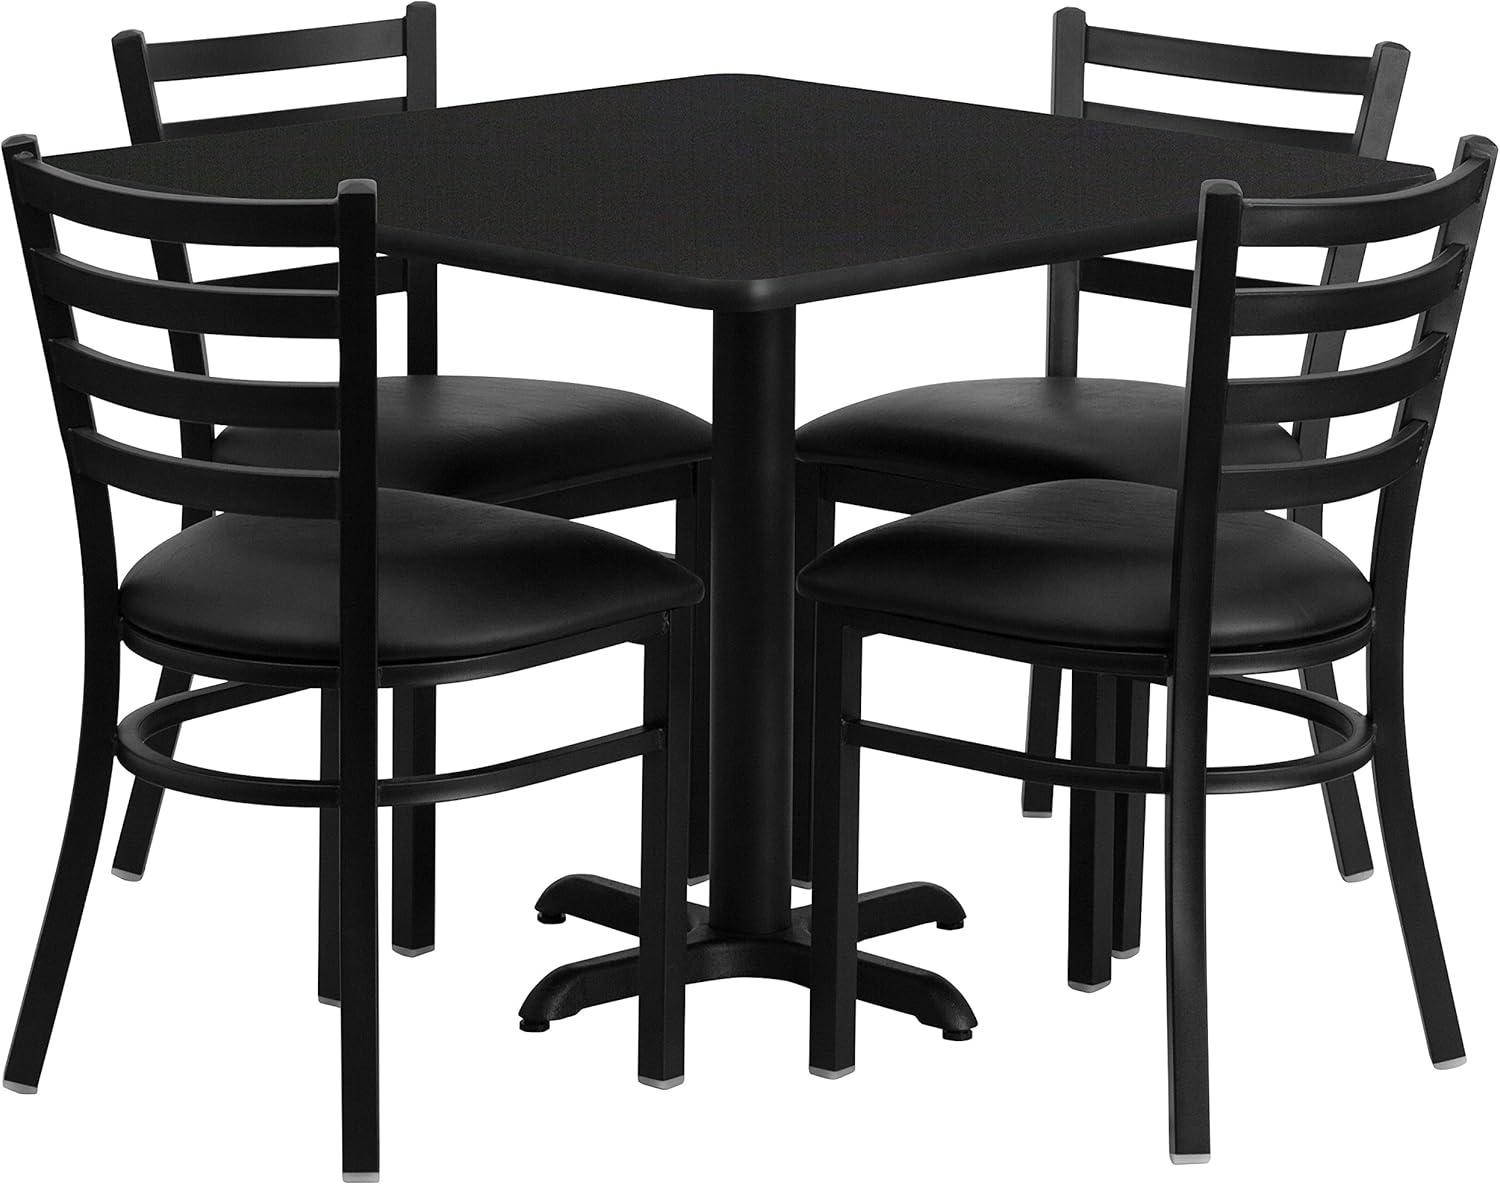 Carlton Square Black Laminate Dining Table Set with 4 Metal Ladder Chairs